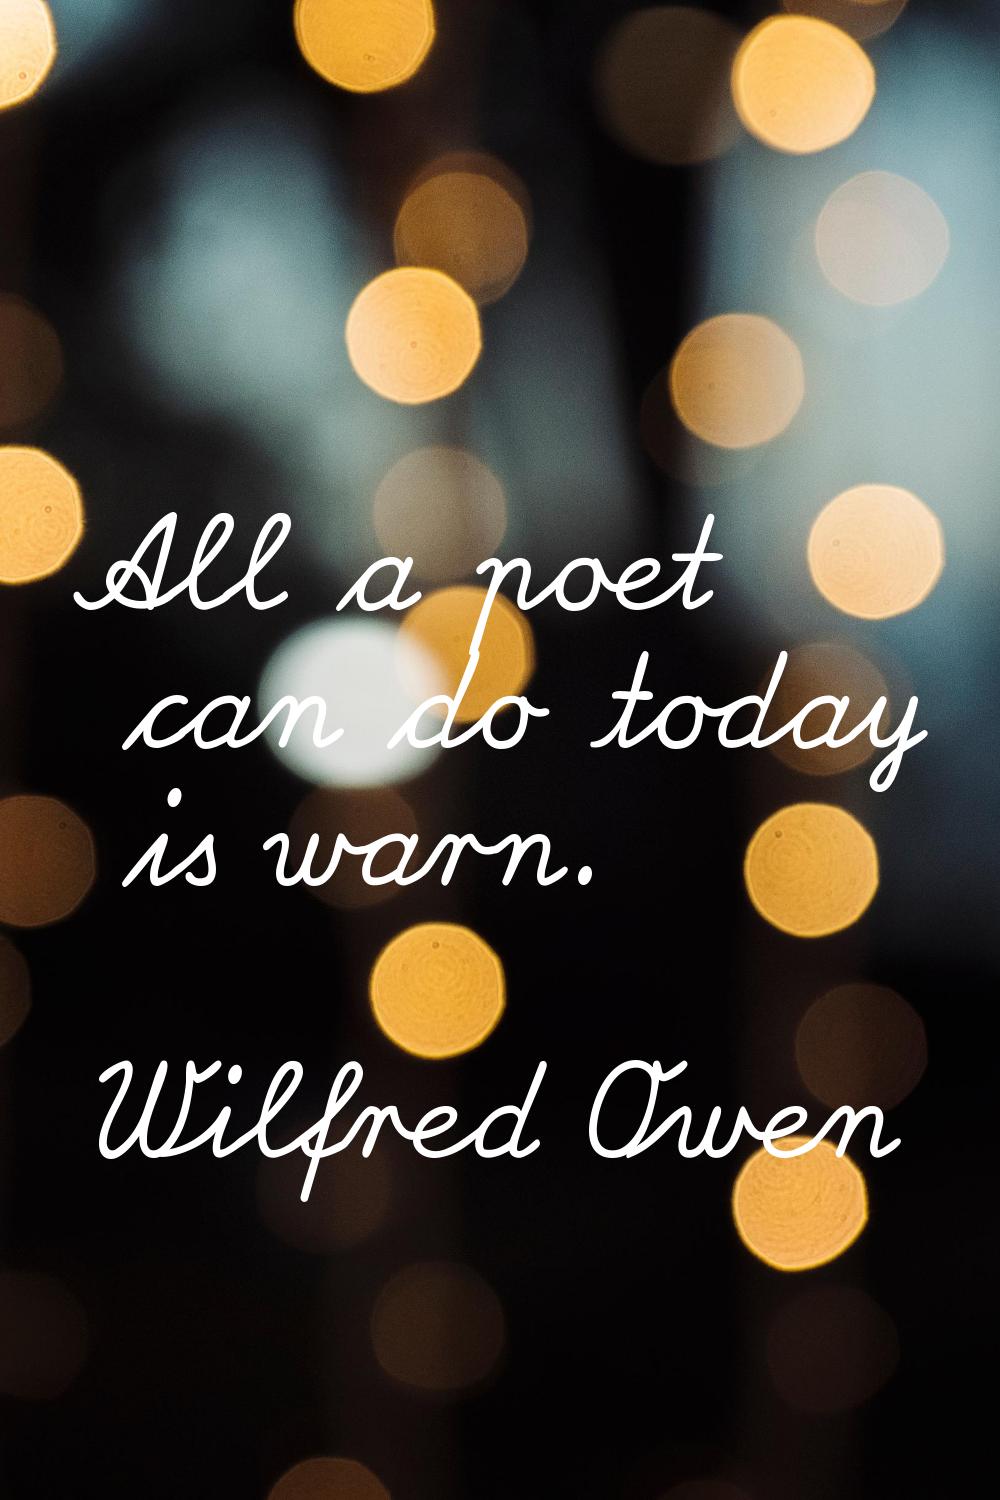 All a poet can do today is warn.